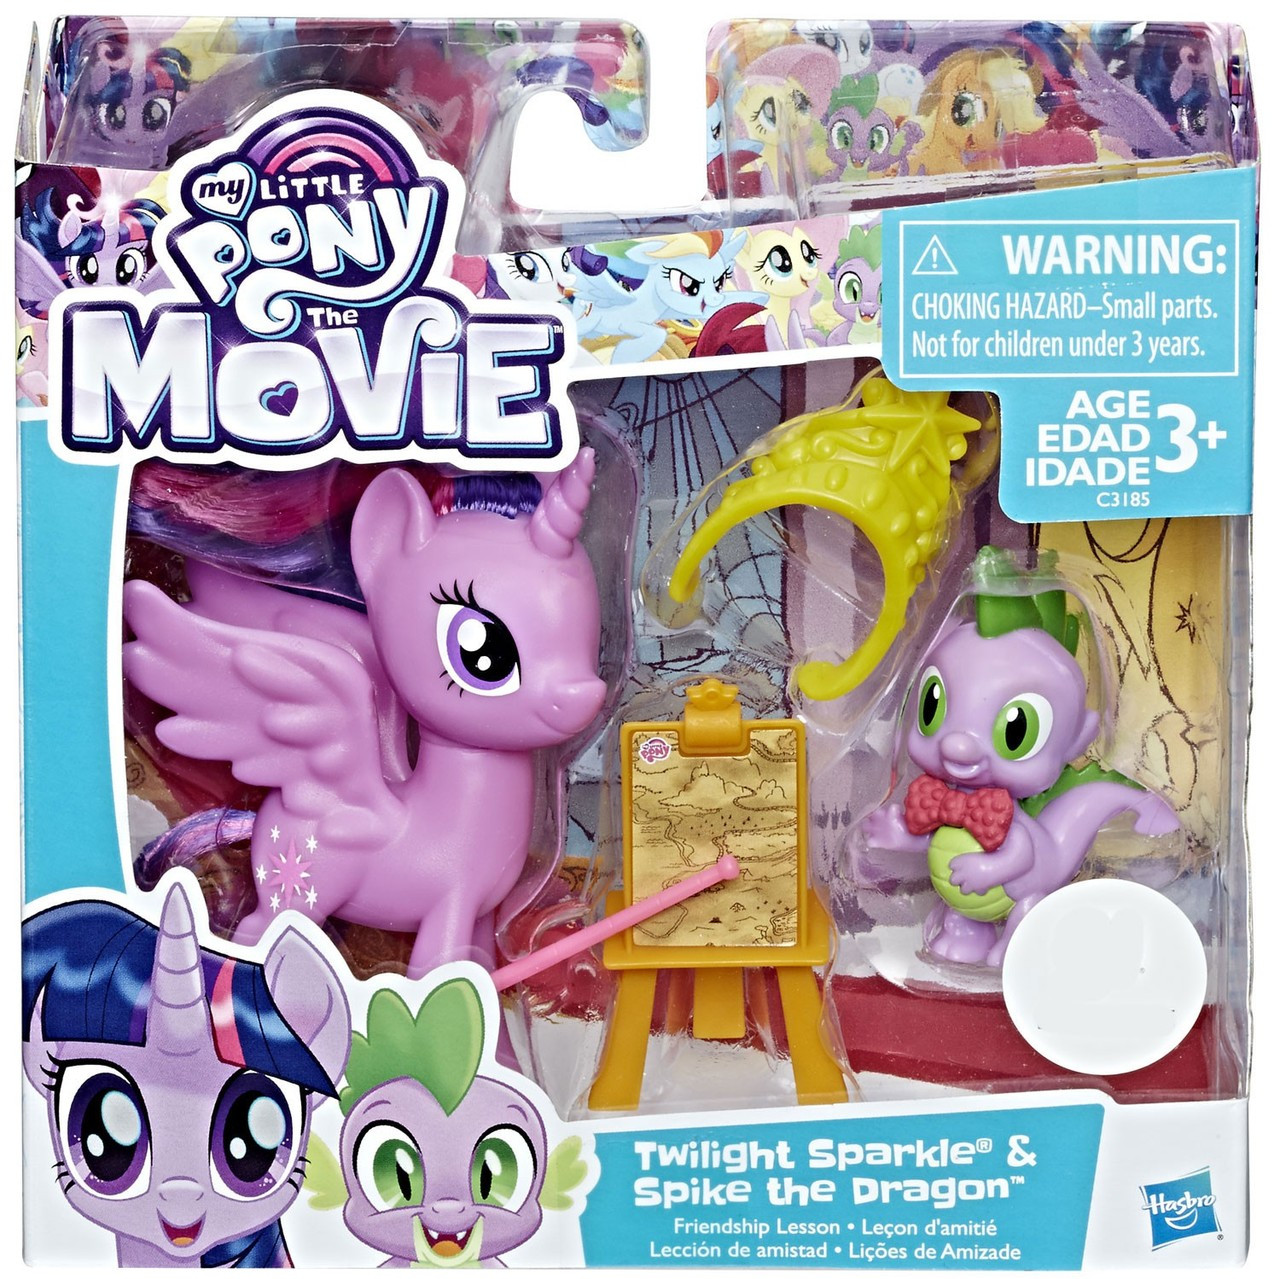 My Little Pony The Movie Twilight Sparkle Spike The Dragon Exclusive Figure 2 Pack Friendship Lesson Hasbro Toys Toywiz - spike in a bag my little pony roblox